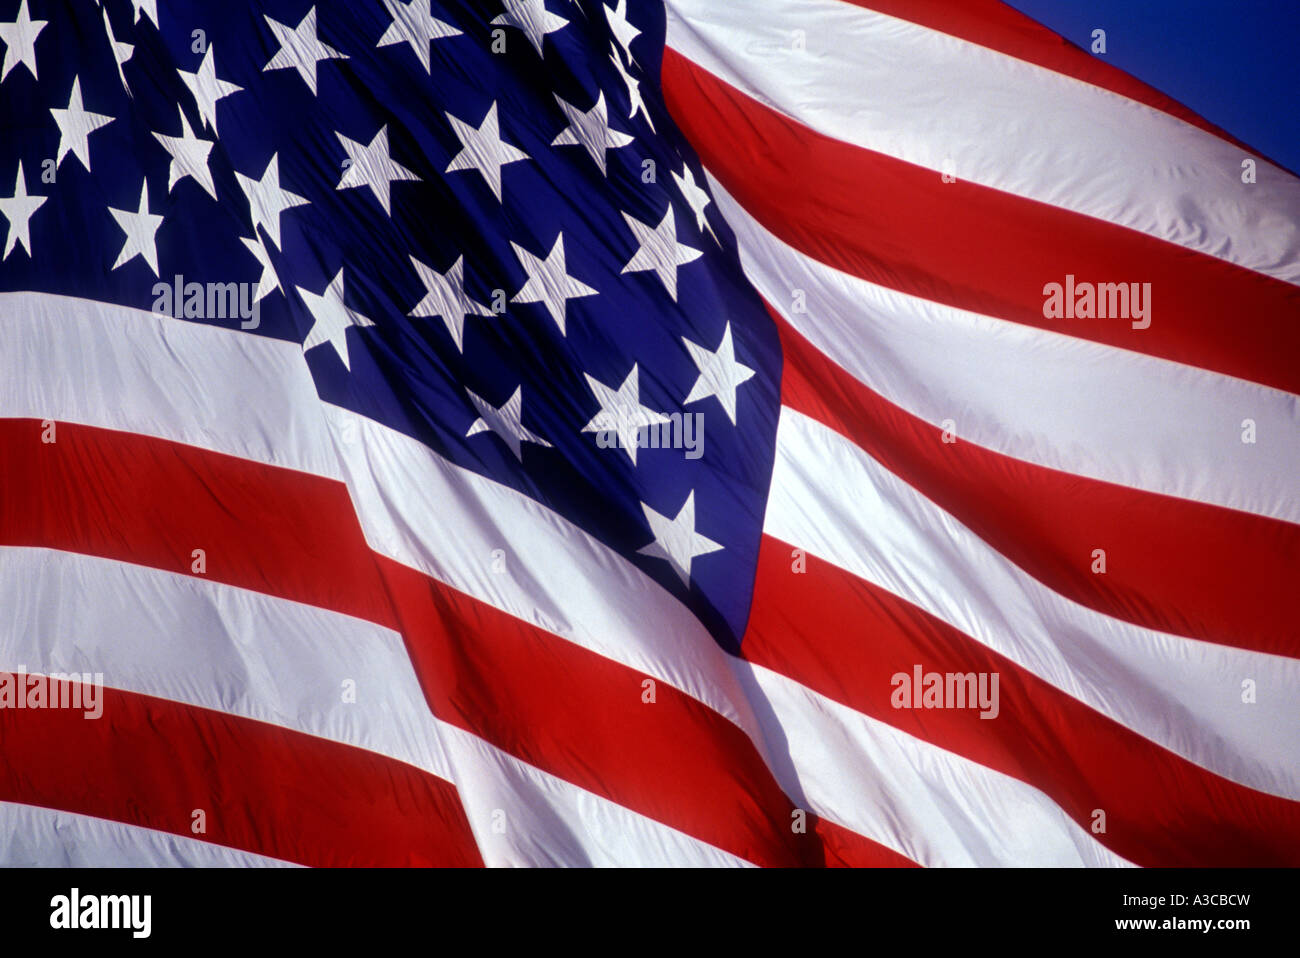 usa united states of america flag close up detail Stock Photo